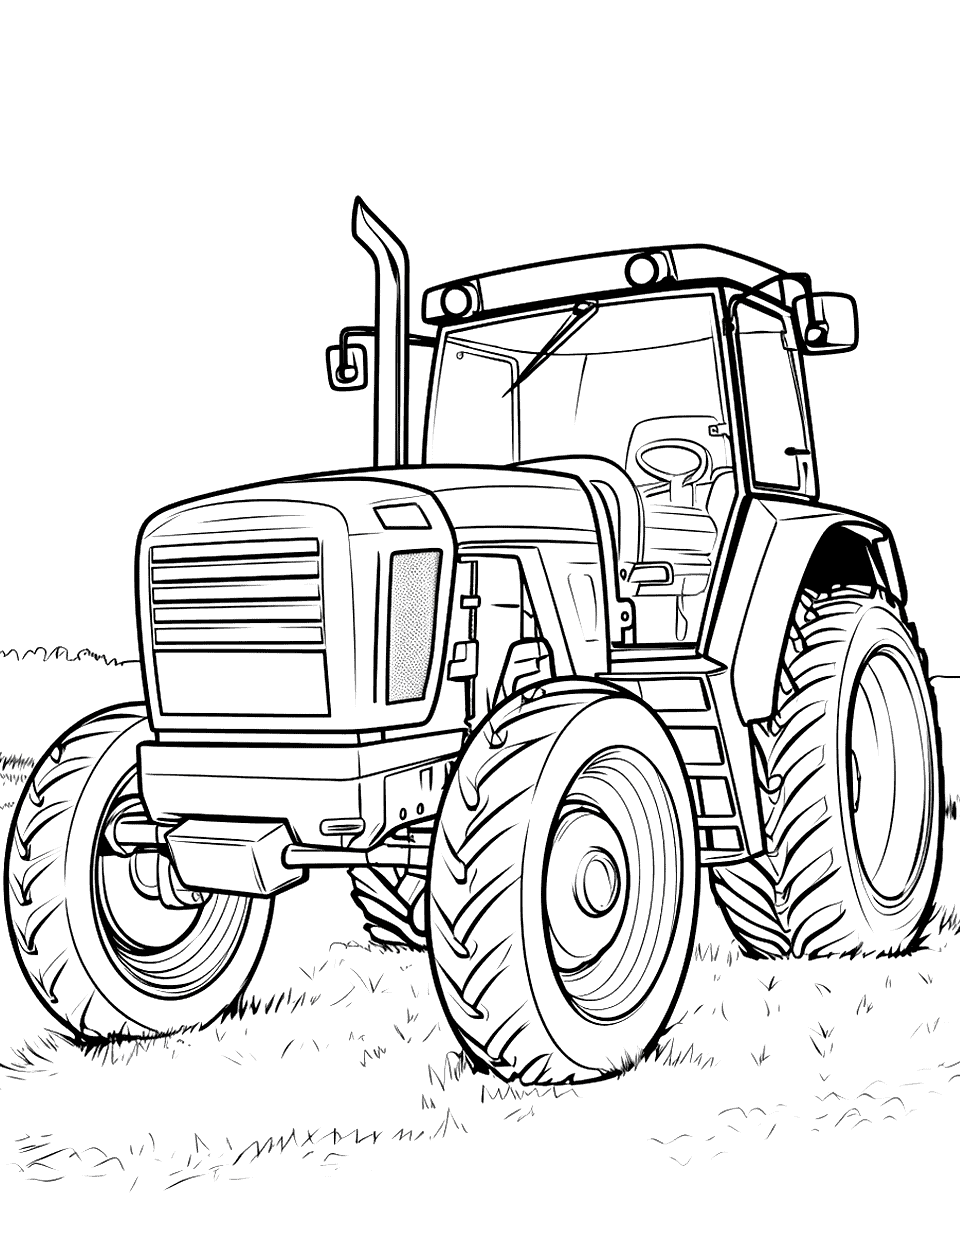 Realistic Tractor  Coloring Page - A detailed depiction of a tractor on a farm field.